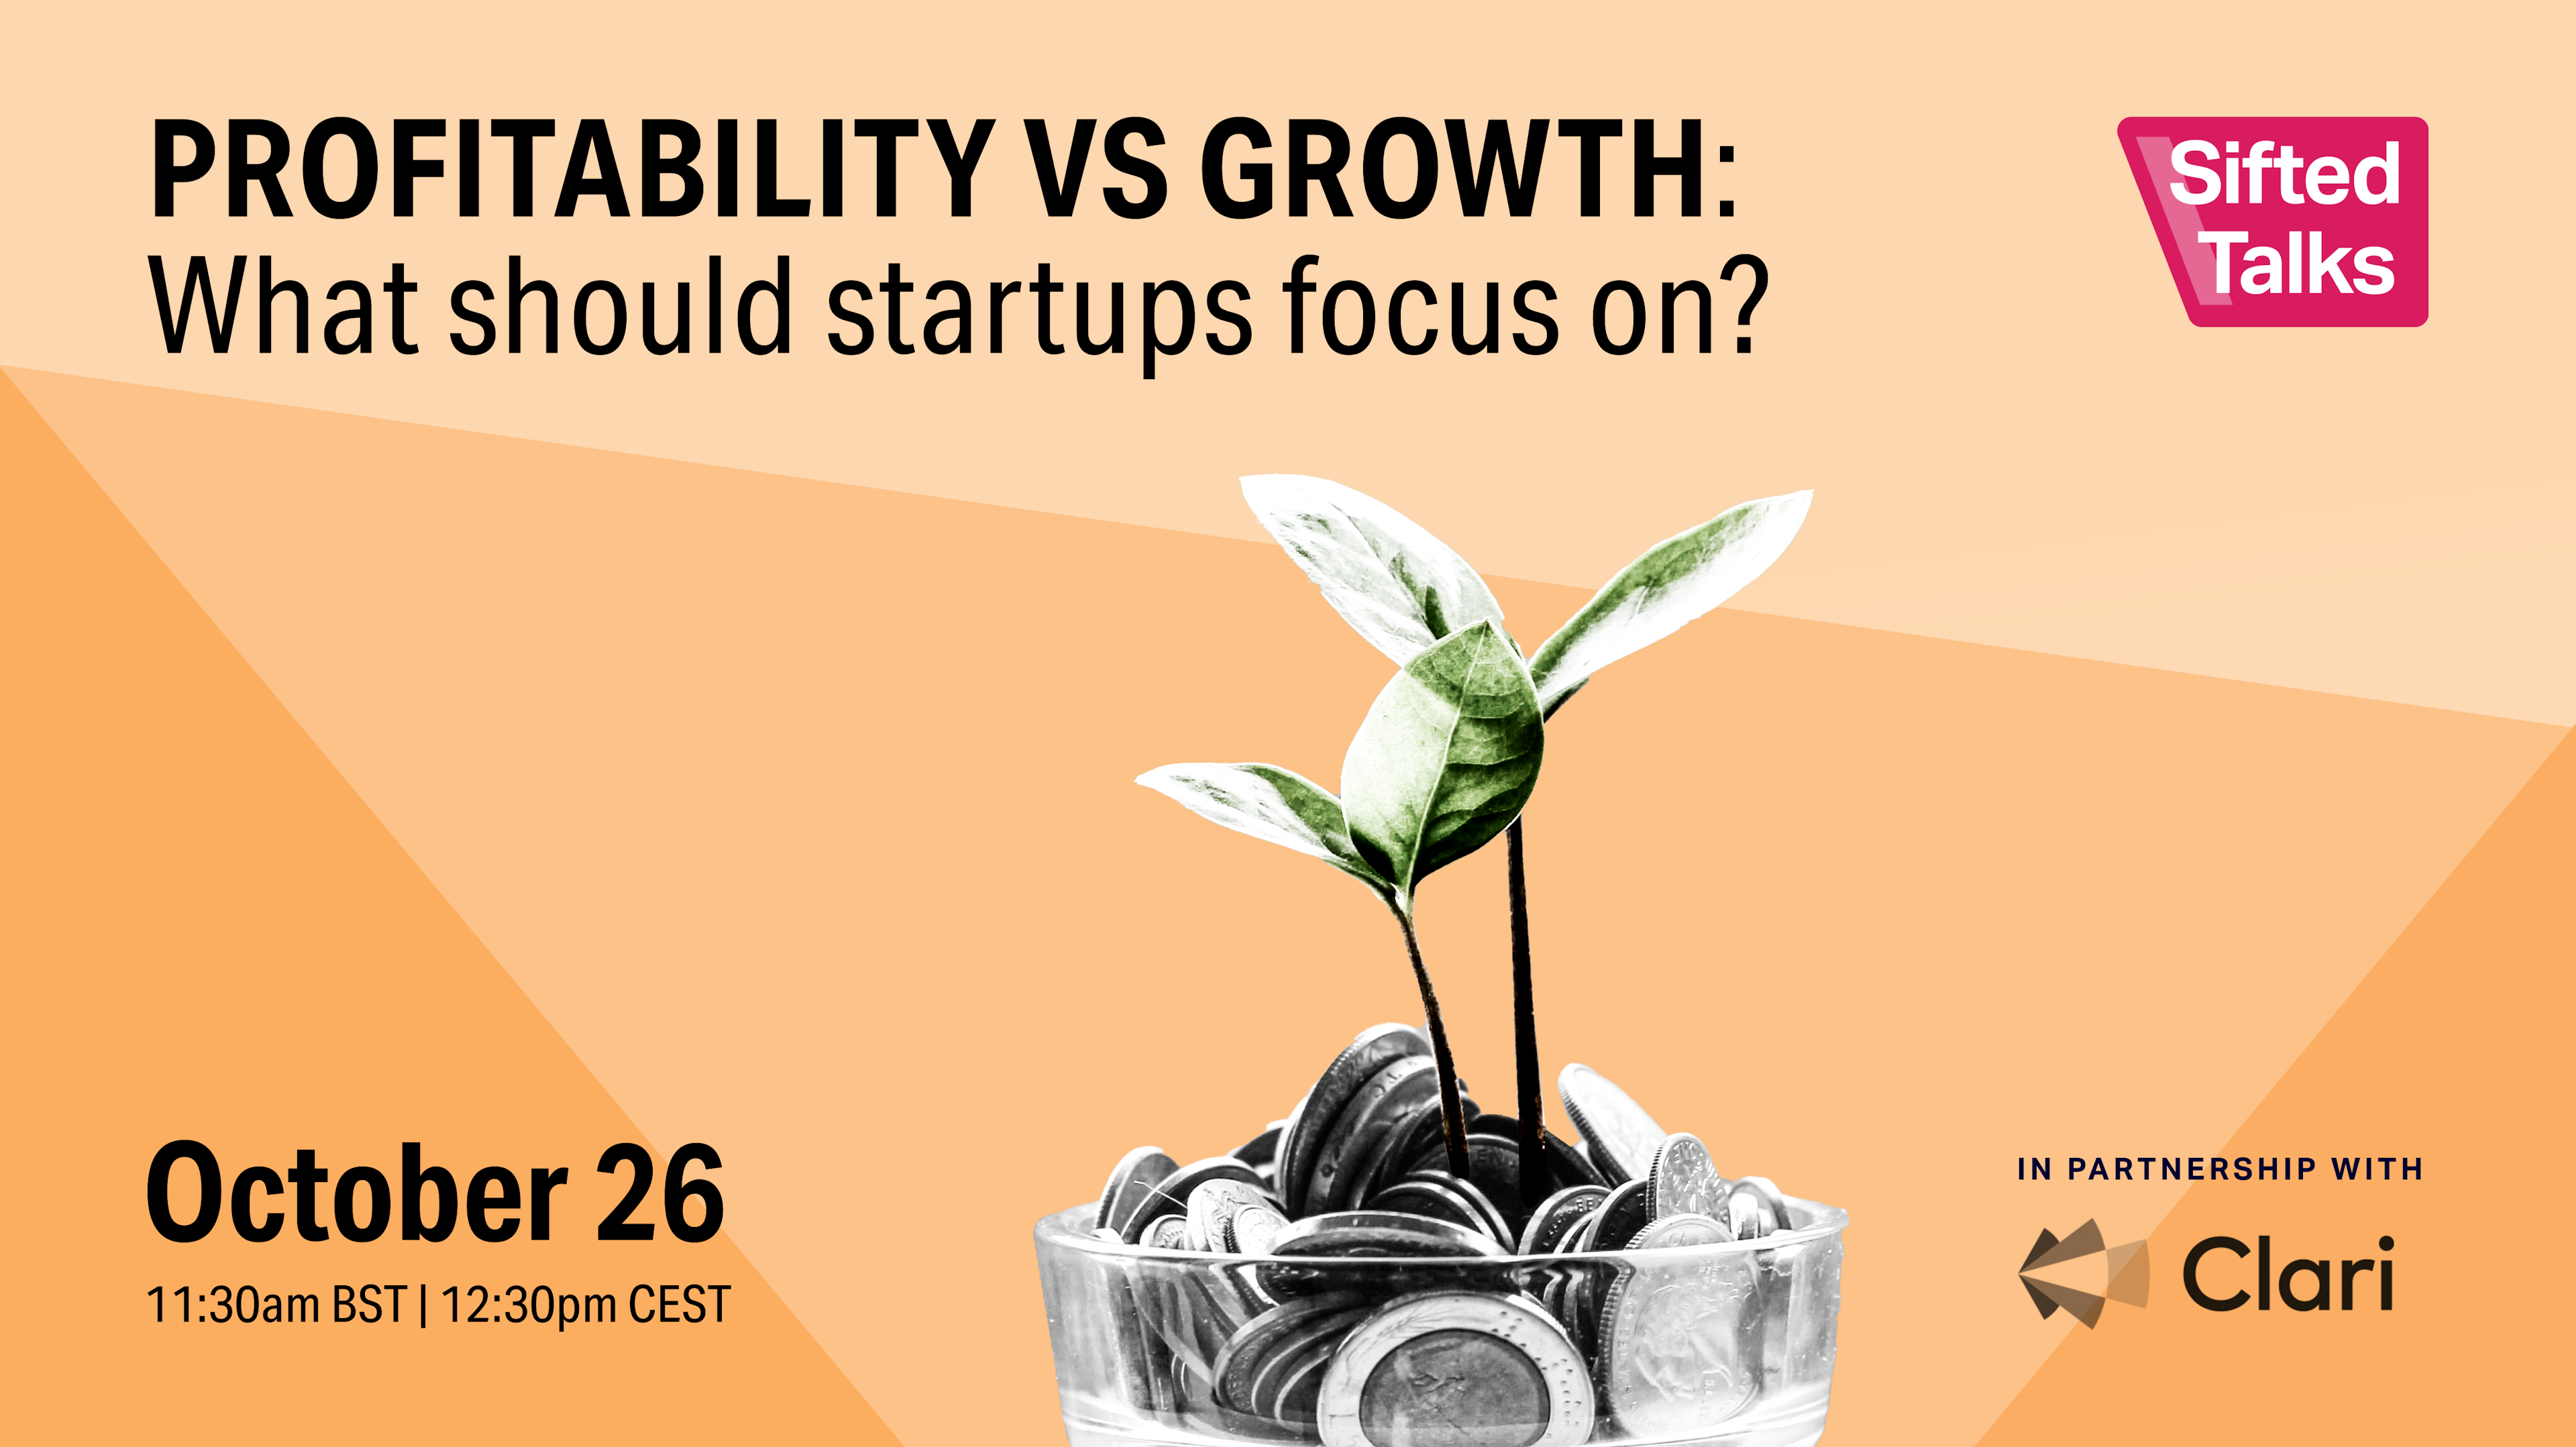 Profitability vs growth: What should startups focus on?